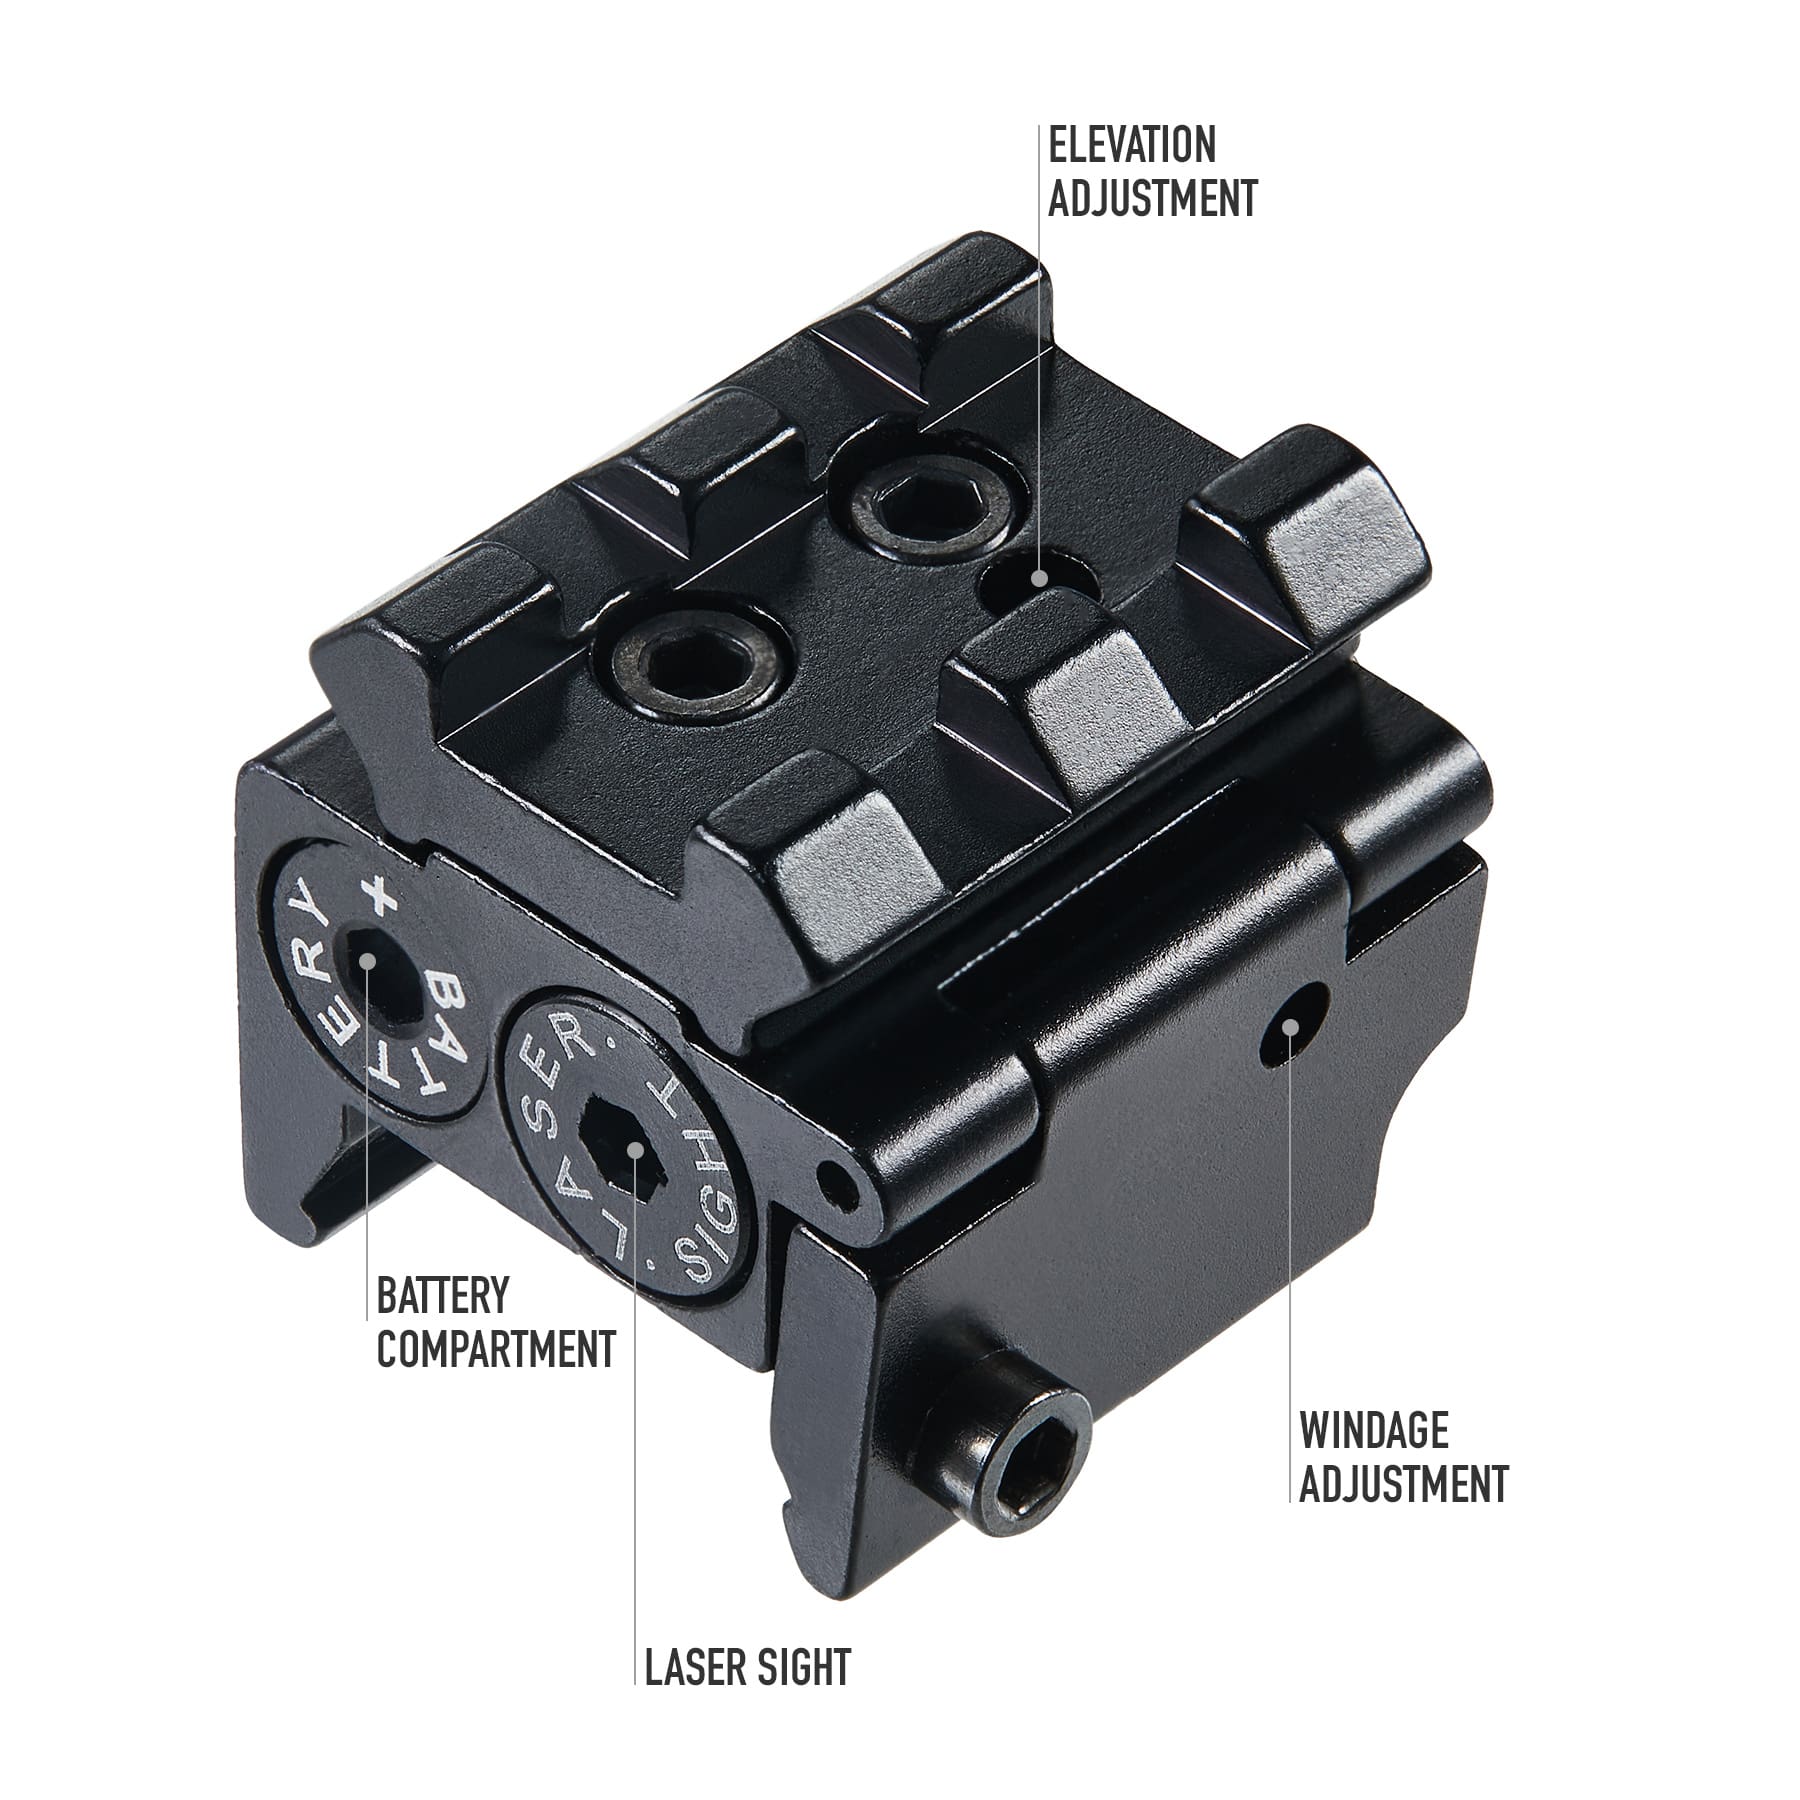    Pinty-Red-Laser-Sight-Sub-Compact-Tactical-Rail-Mount-Low-Profile